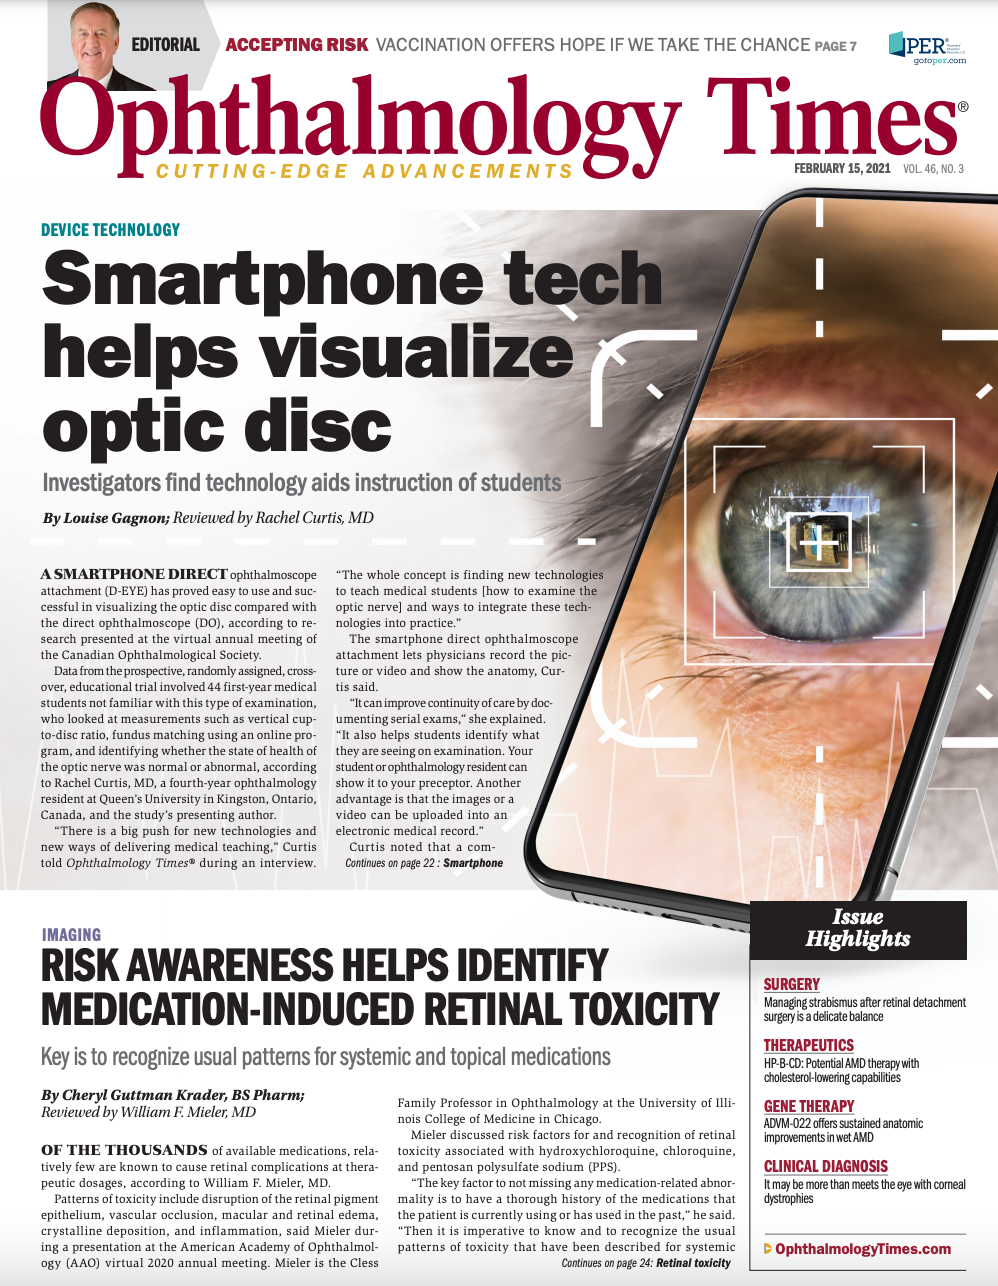 Ophthalmology Times: February 15, 2021